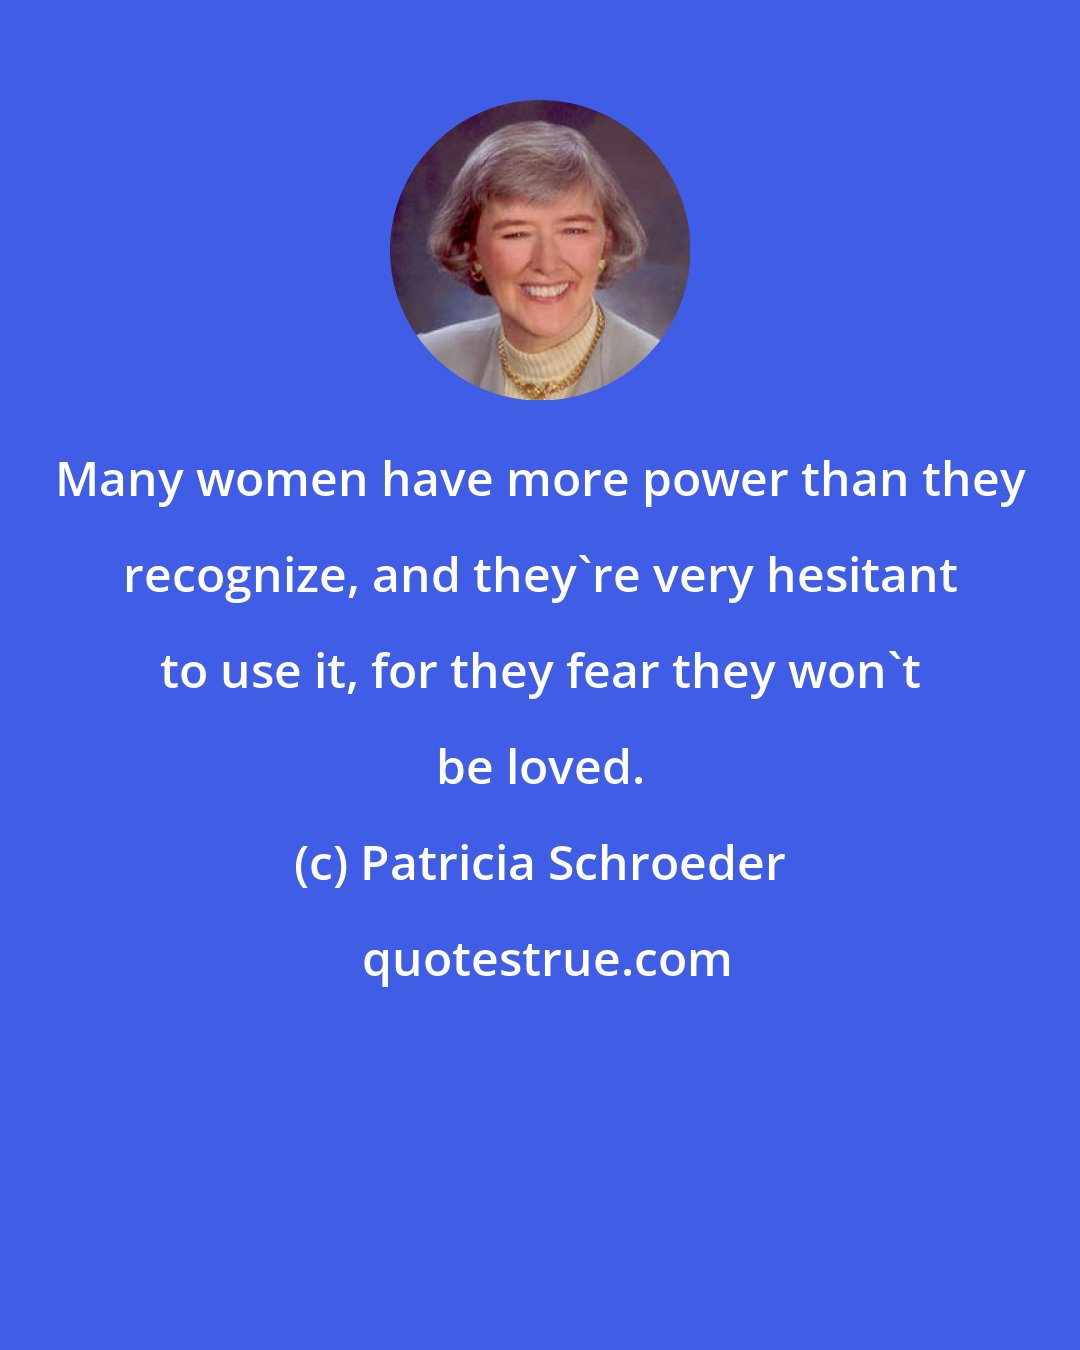 Patricia Schroeder: Many women have more power than they recognize, and they're very hesitant to use it, for they fear they won't be loved.